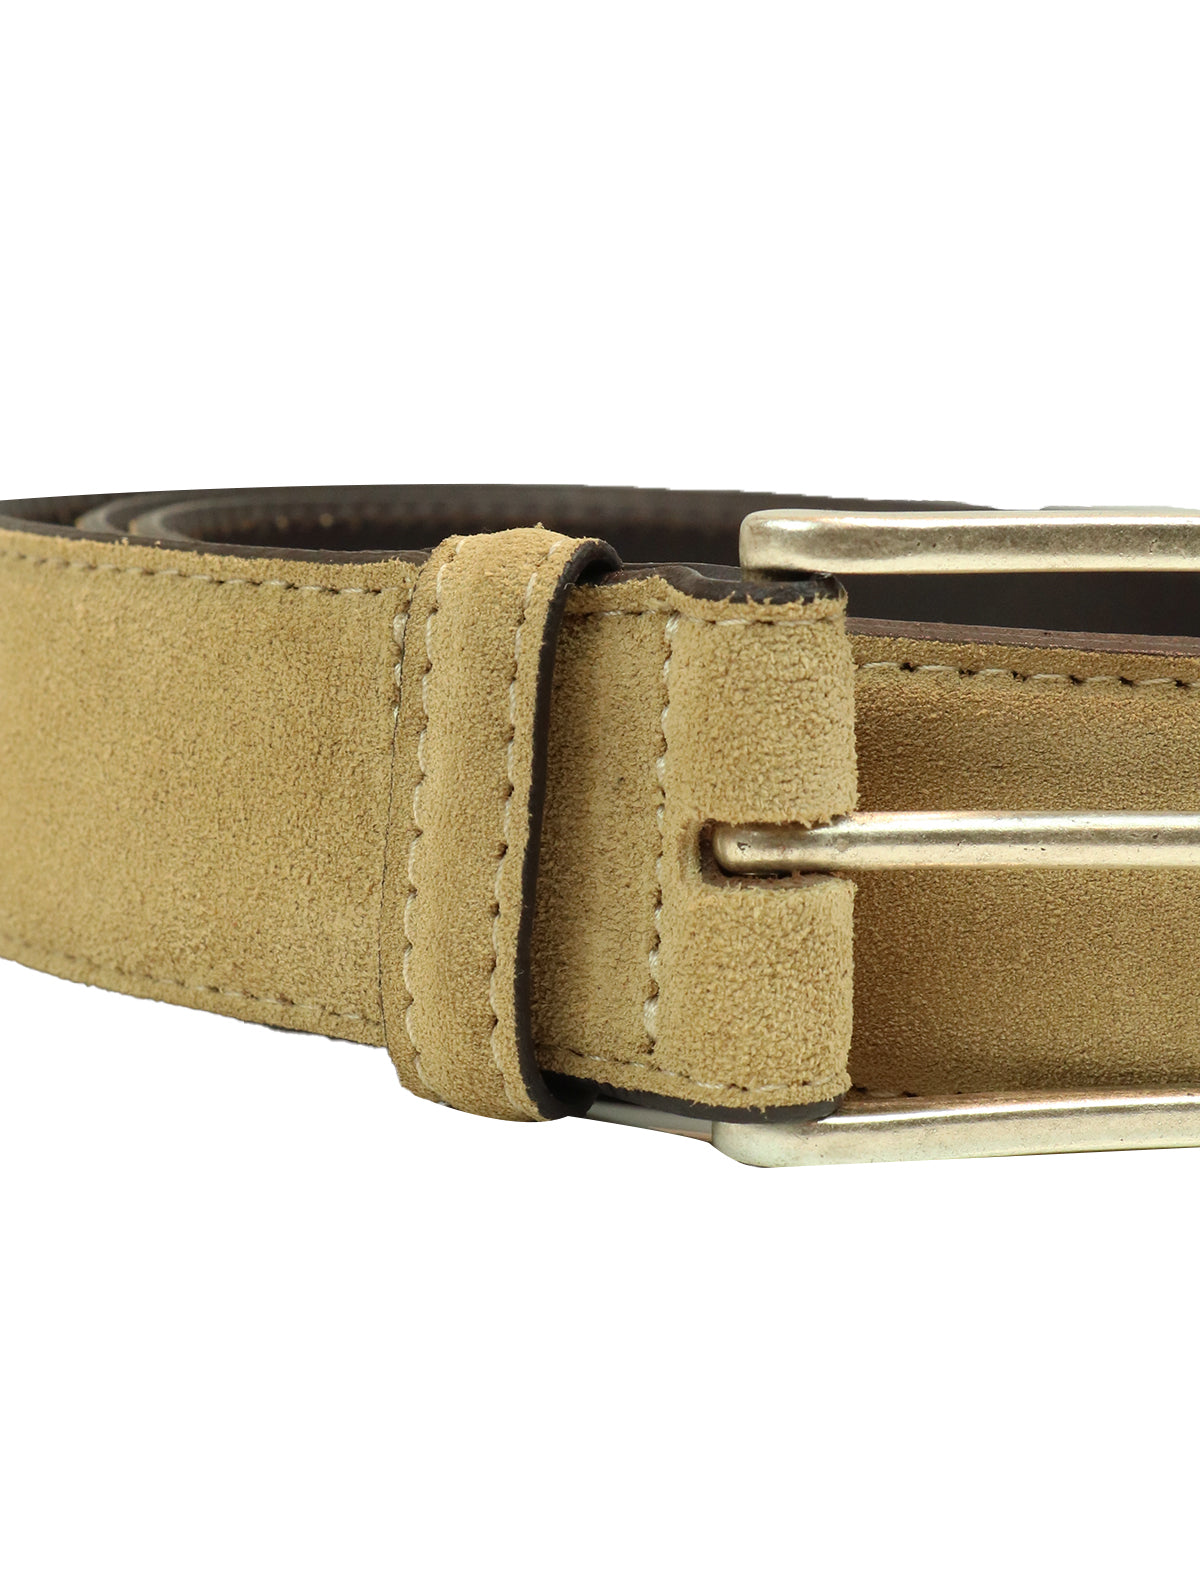 Andrea d'Amico Suede Belt in Beige